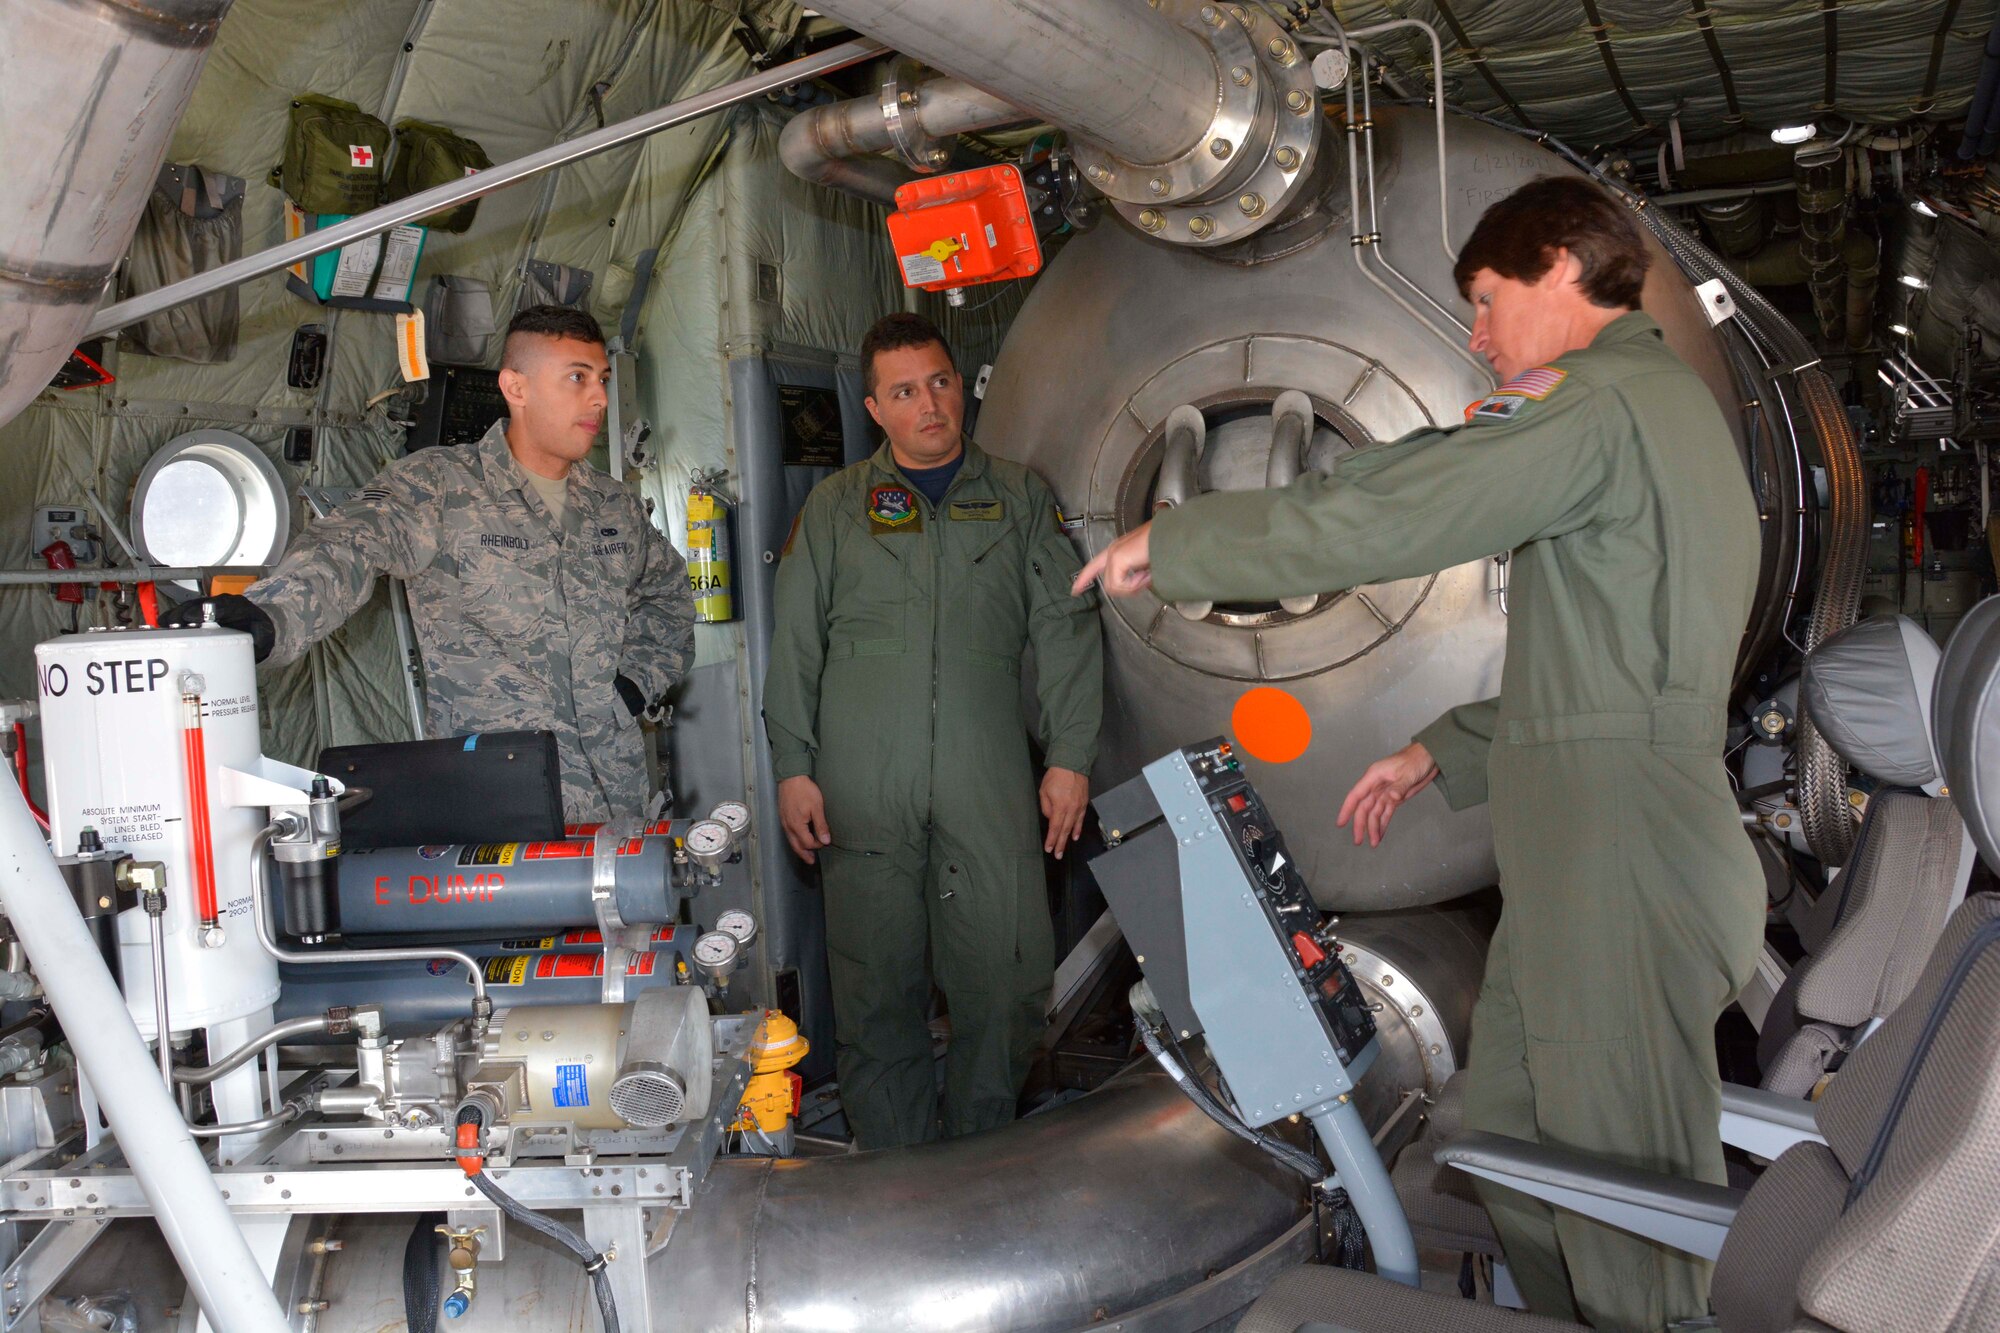 U.S. Air Force Master Sgt. Pennie Brawley, loadmaster for the 145th Airlift Wing, explains while Senior Airman Winston Rheinbolt, crew chief for the 145th Maintenance Squadron, translates in Spanish, the procedures used when operating a Modular Airborne Firefighting System II (MAFFS II) to visiting aircrew member from Colombian Fuerza Aerea C-130 community. Senior aircrew instructors from the 81st, Escuadrón de Transporte, Bogota were given a first-hand look at the unit during the 2015 annual classroom certification and re-certification training, held April 29 thru May 3, 2015 at the North Carolina Air National Guard Base, Charlotte Douglas International Airport. (U.S. Air National Guard photo by Master Sgt. Patricia F. Moran, 145th Public Affairs/Released)